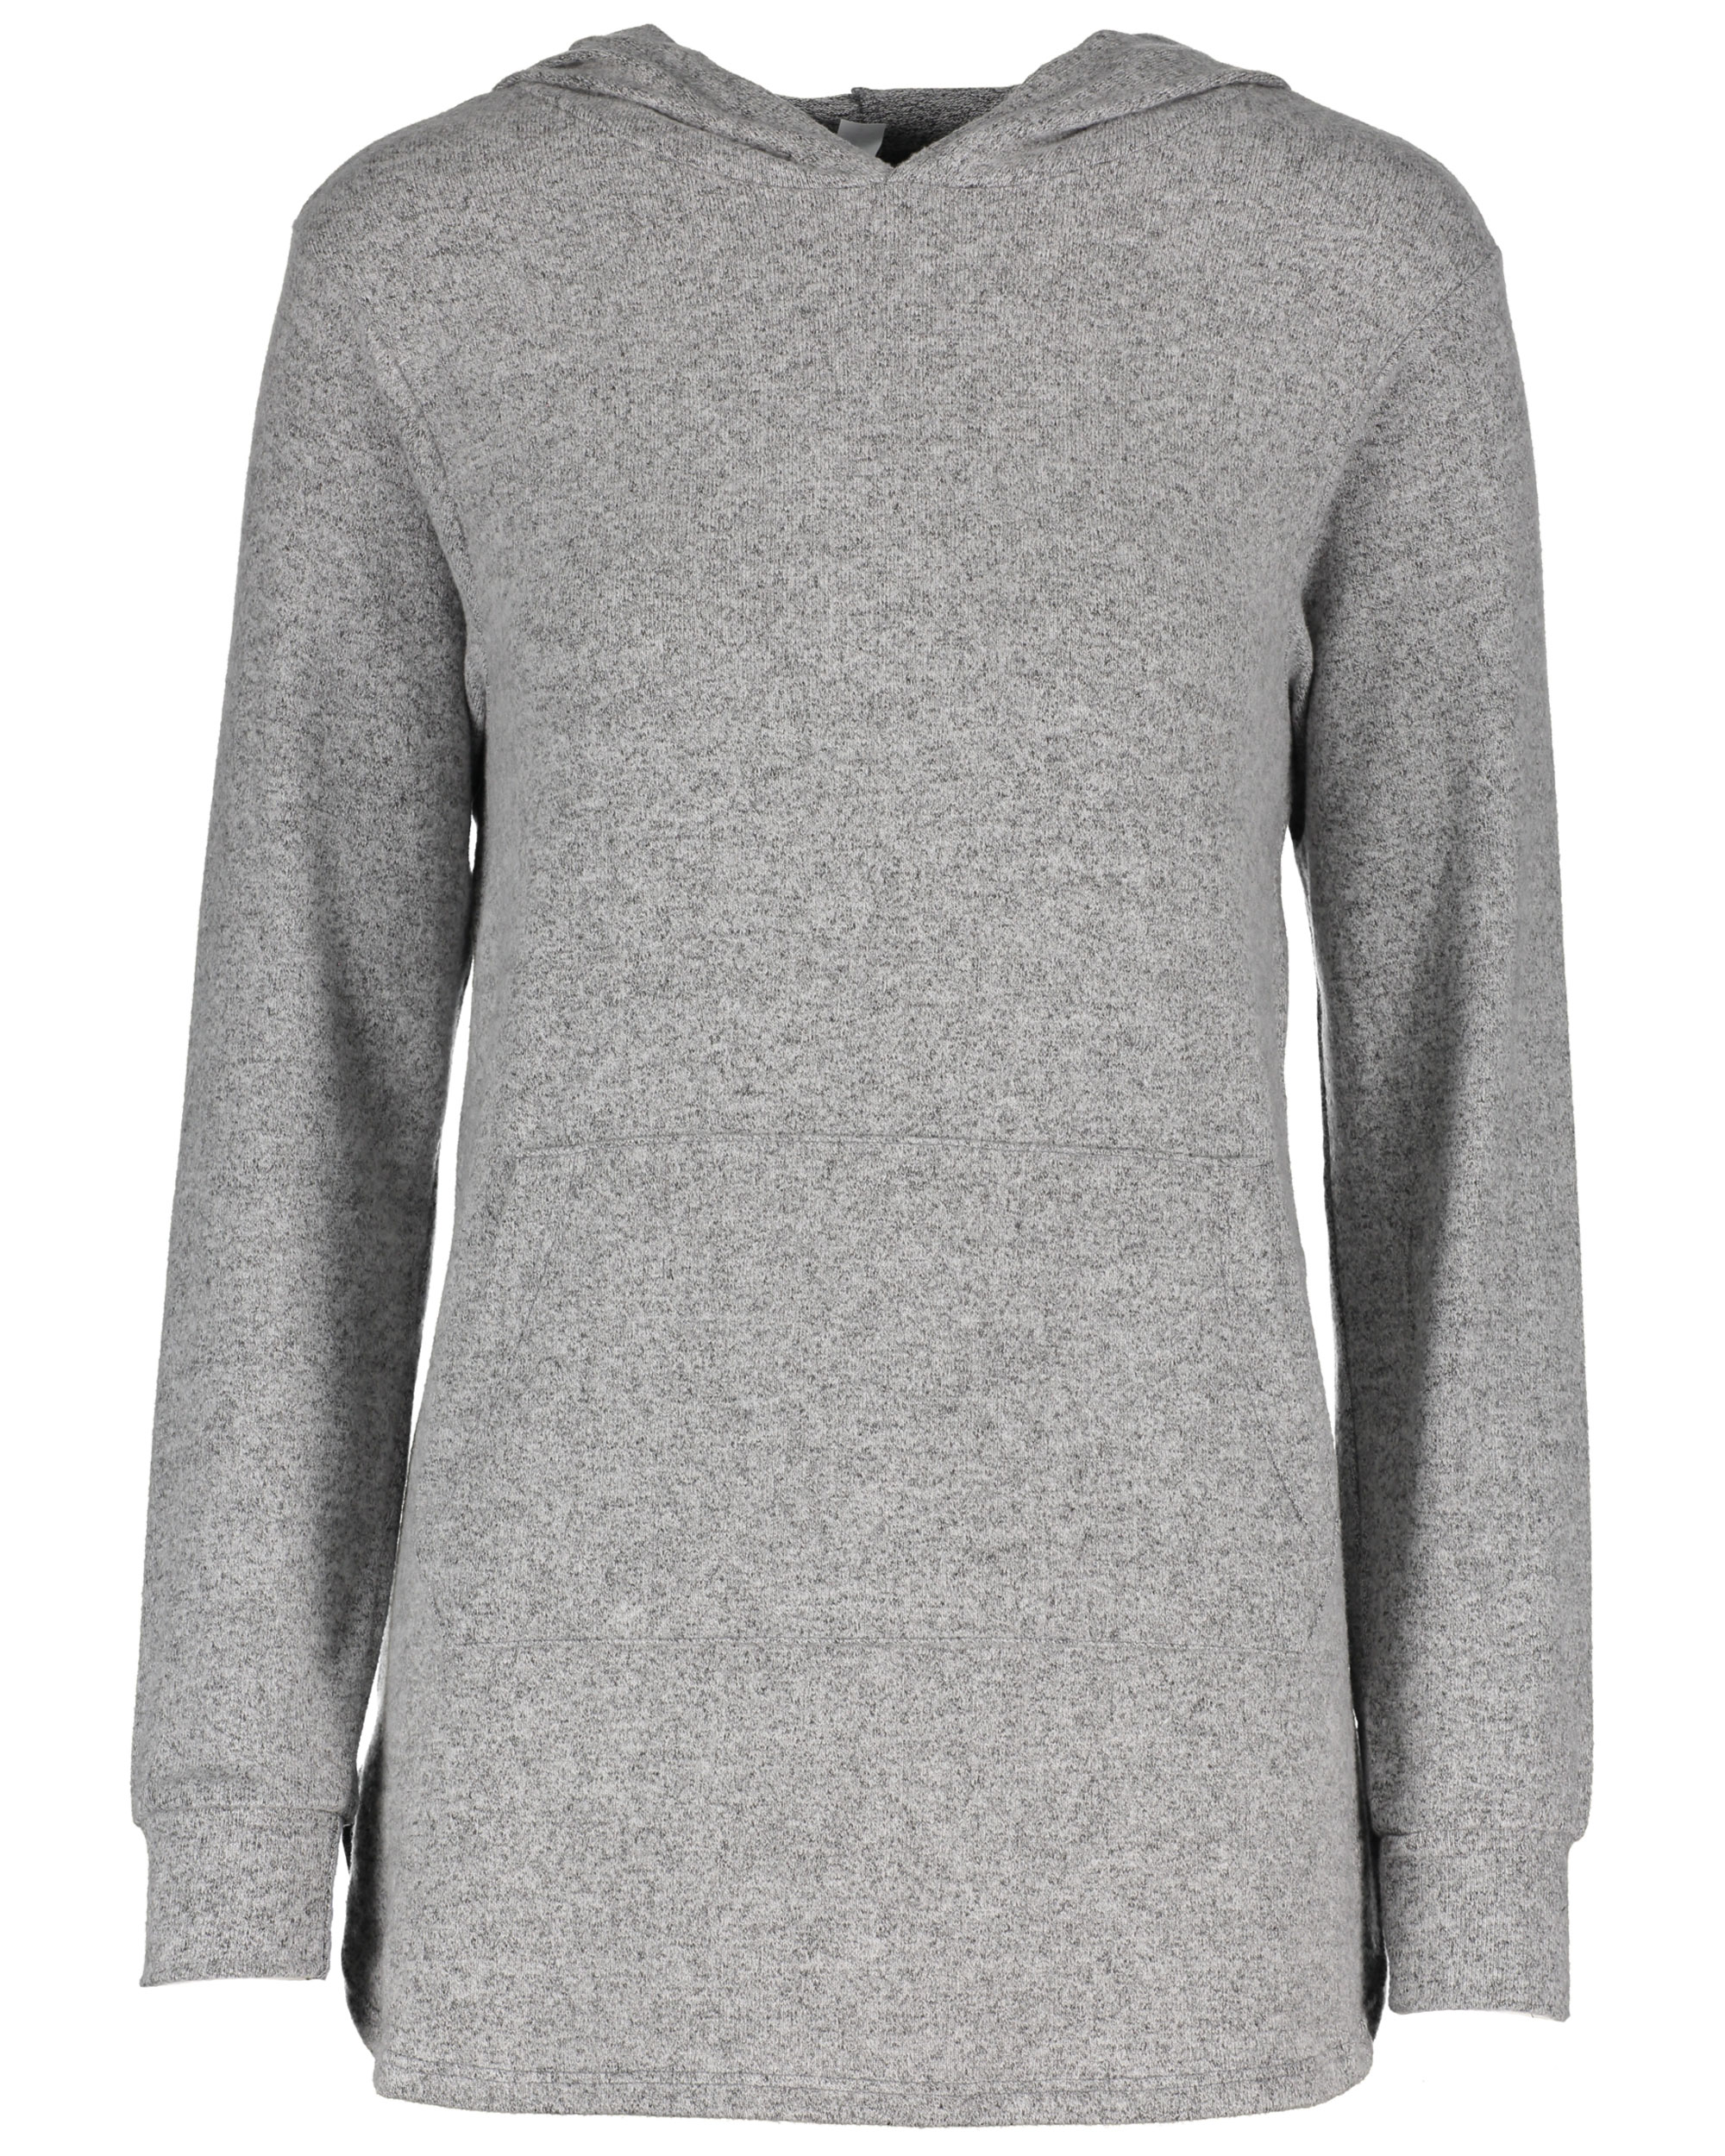 Enza® 02679 Ladies Hacci Pullover Hood with Pocket, shown in Heather Grey